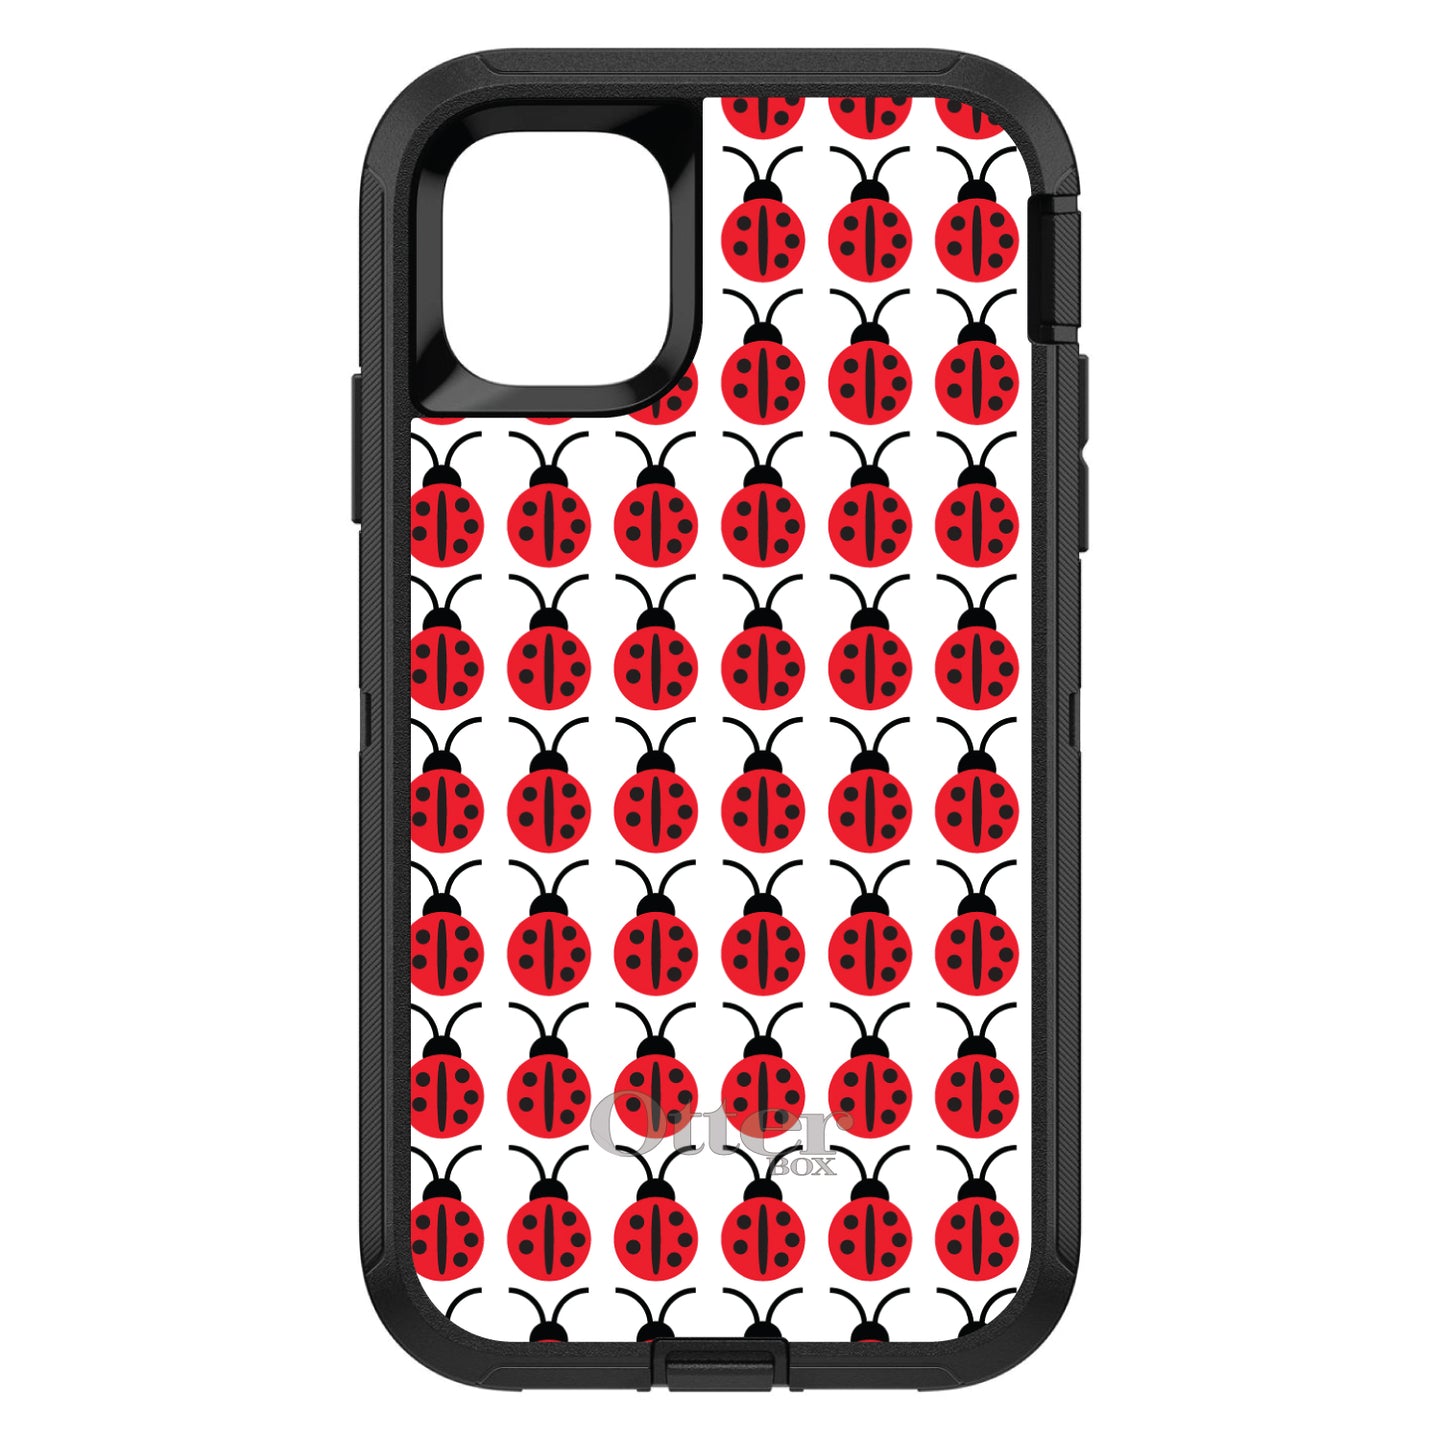 DistinctInk™ OtterBox Defender Series Case for Apple iPhone / Samsung Galaxy / Google Pixel - Red White Black Lady Bugs